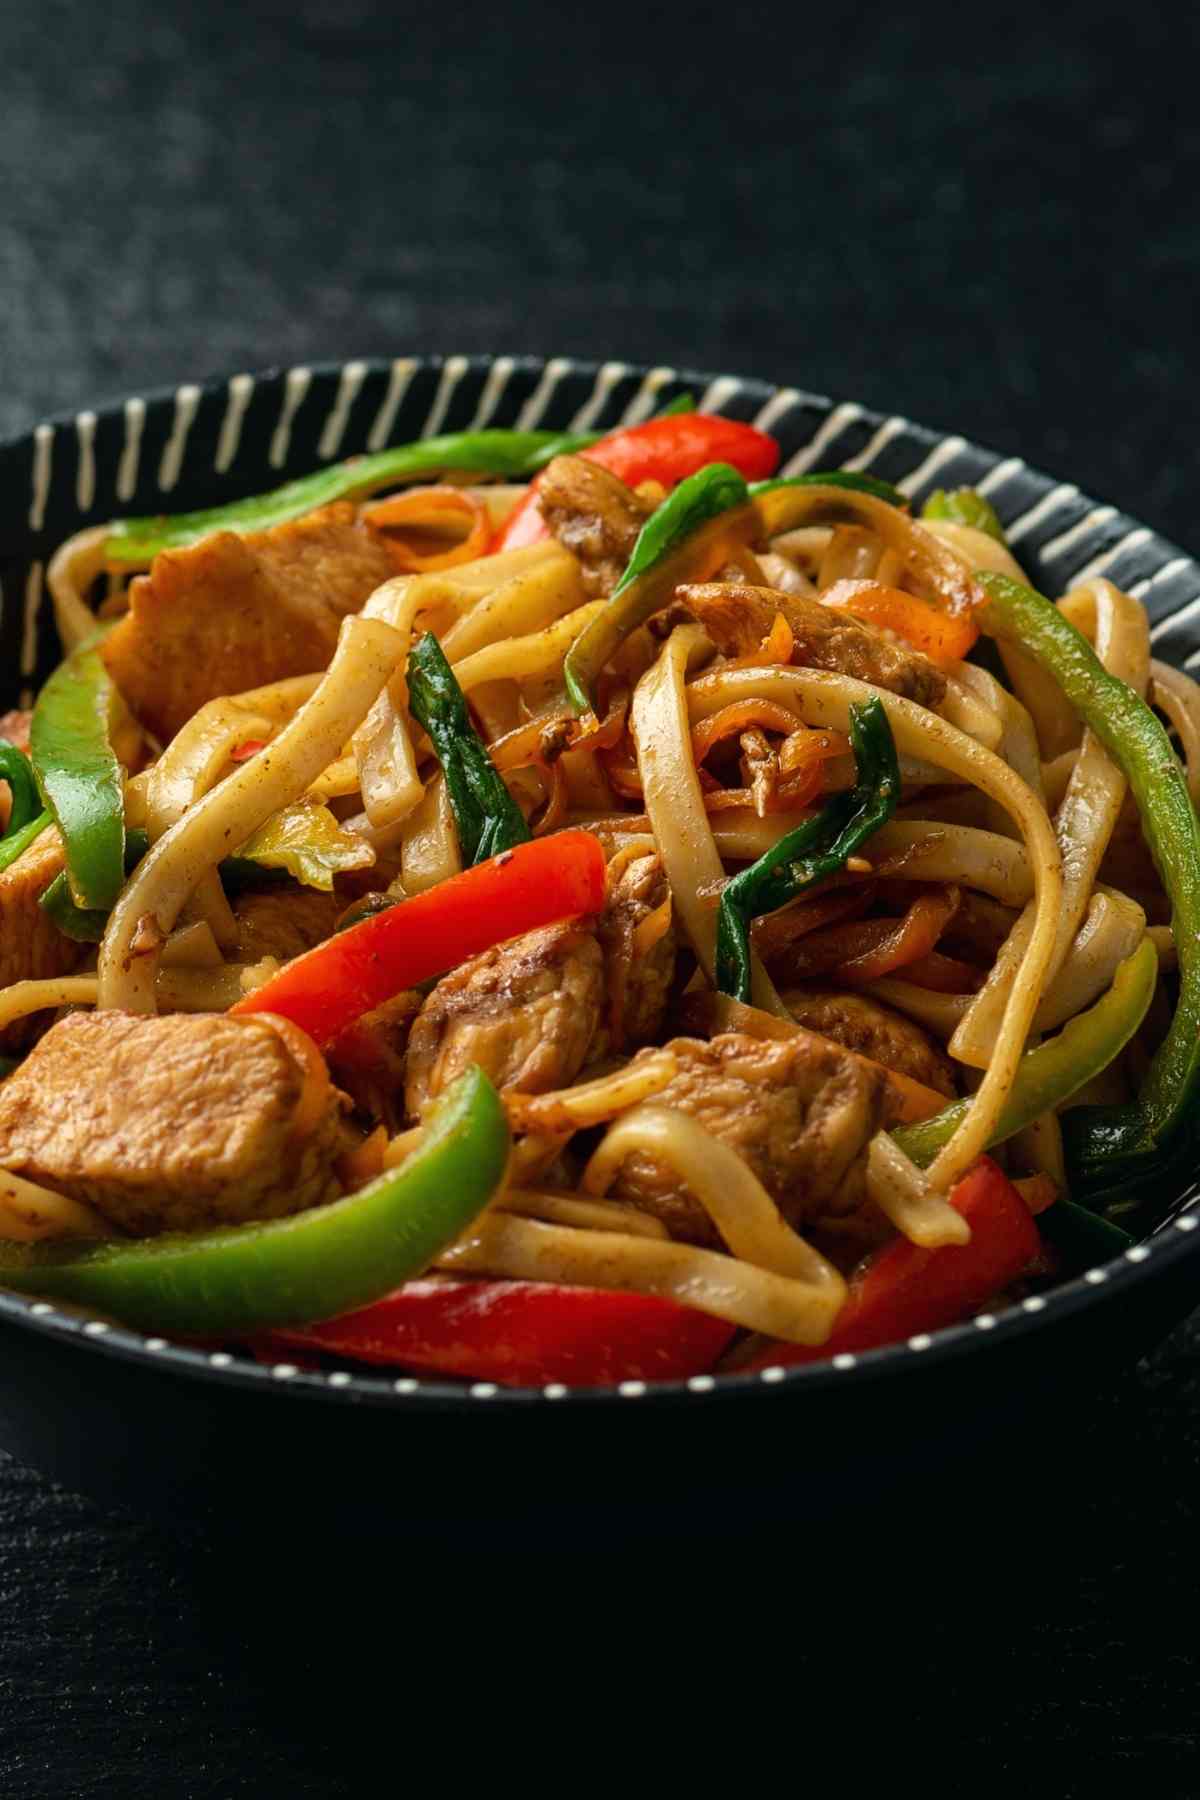 Chicken Chow Fun is loaded with wide noodles, tender chicken pieces, and crispy vegetables, and it's ready in minutes! Prepare to be amazed at what you can create with just a few ingredients and a nonstick skillet!